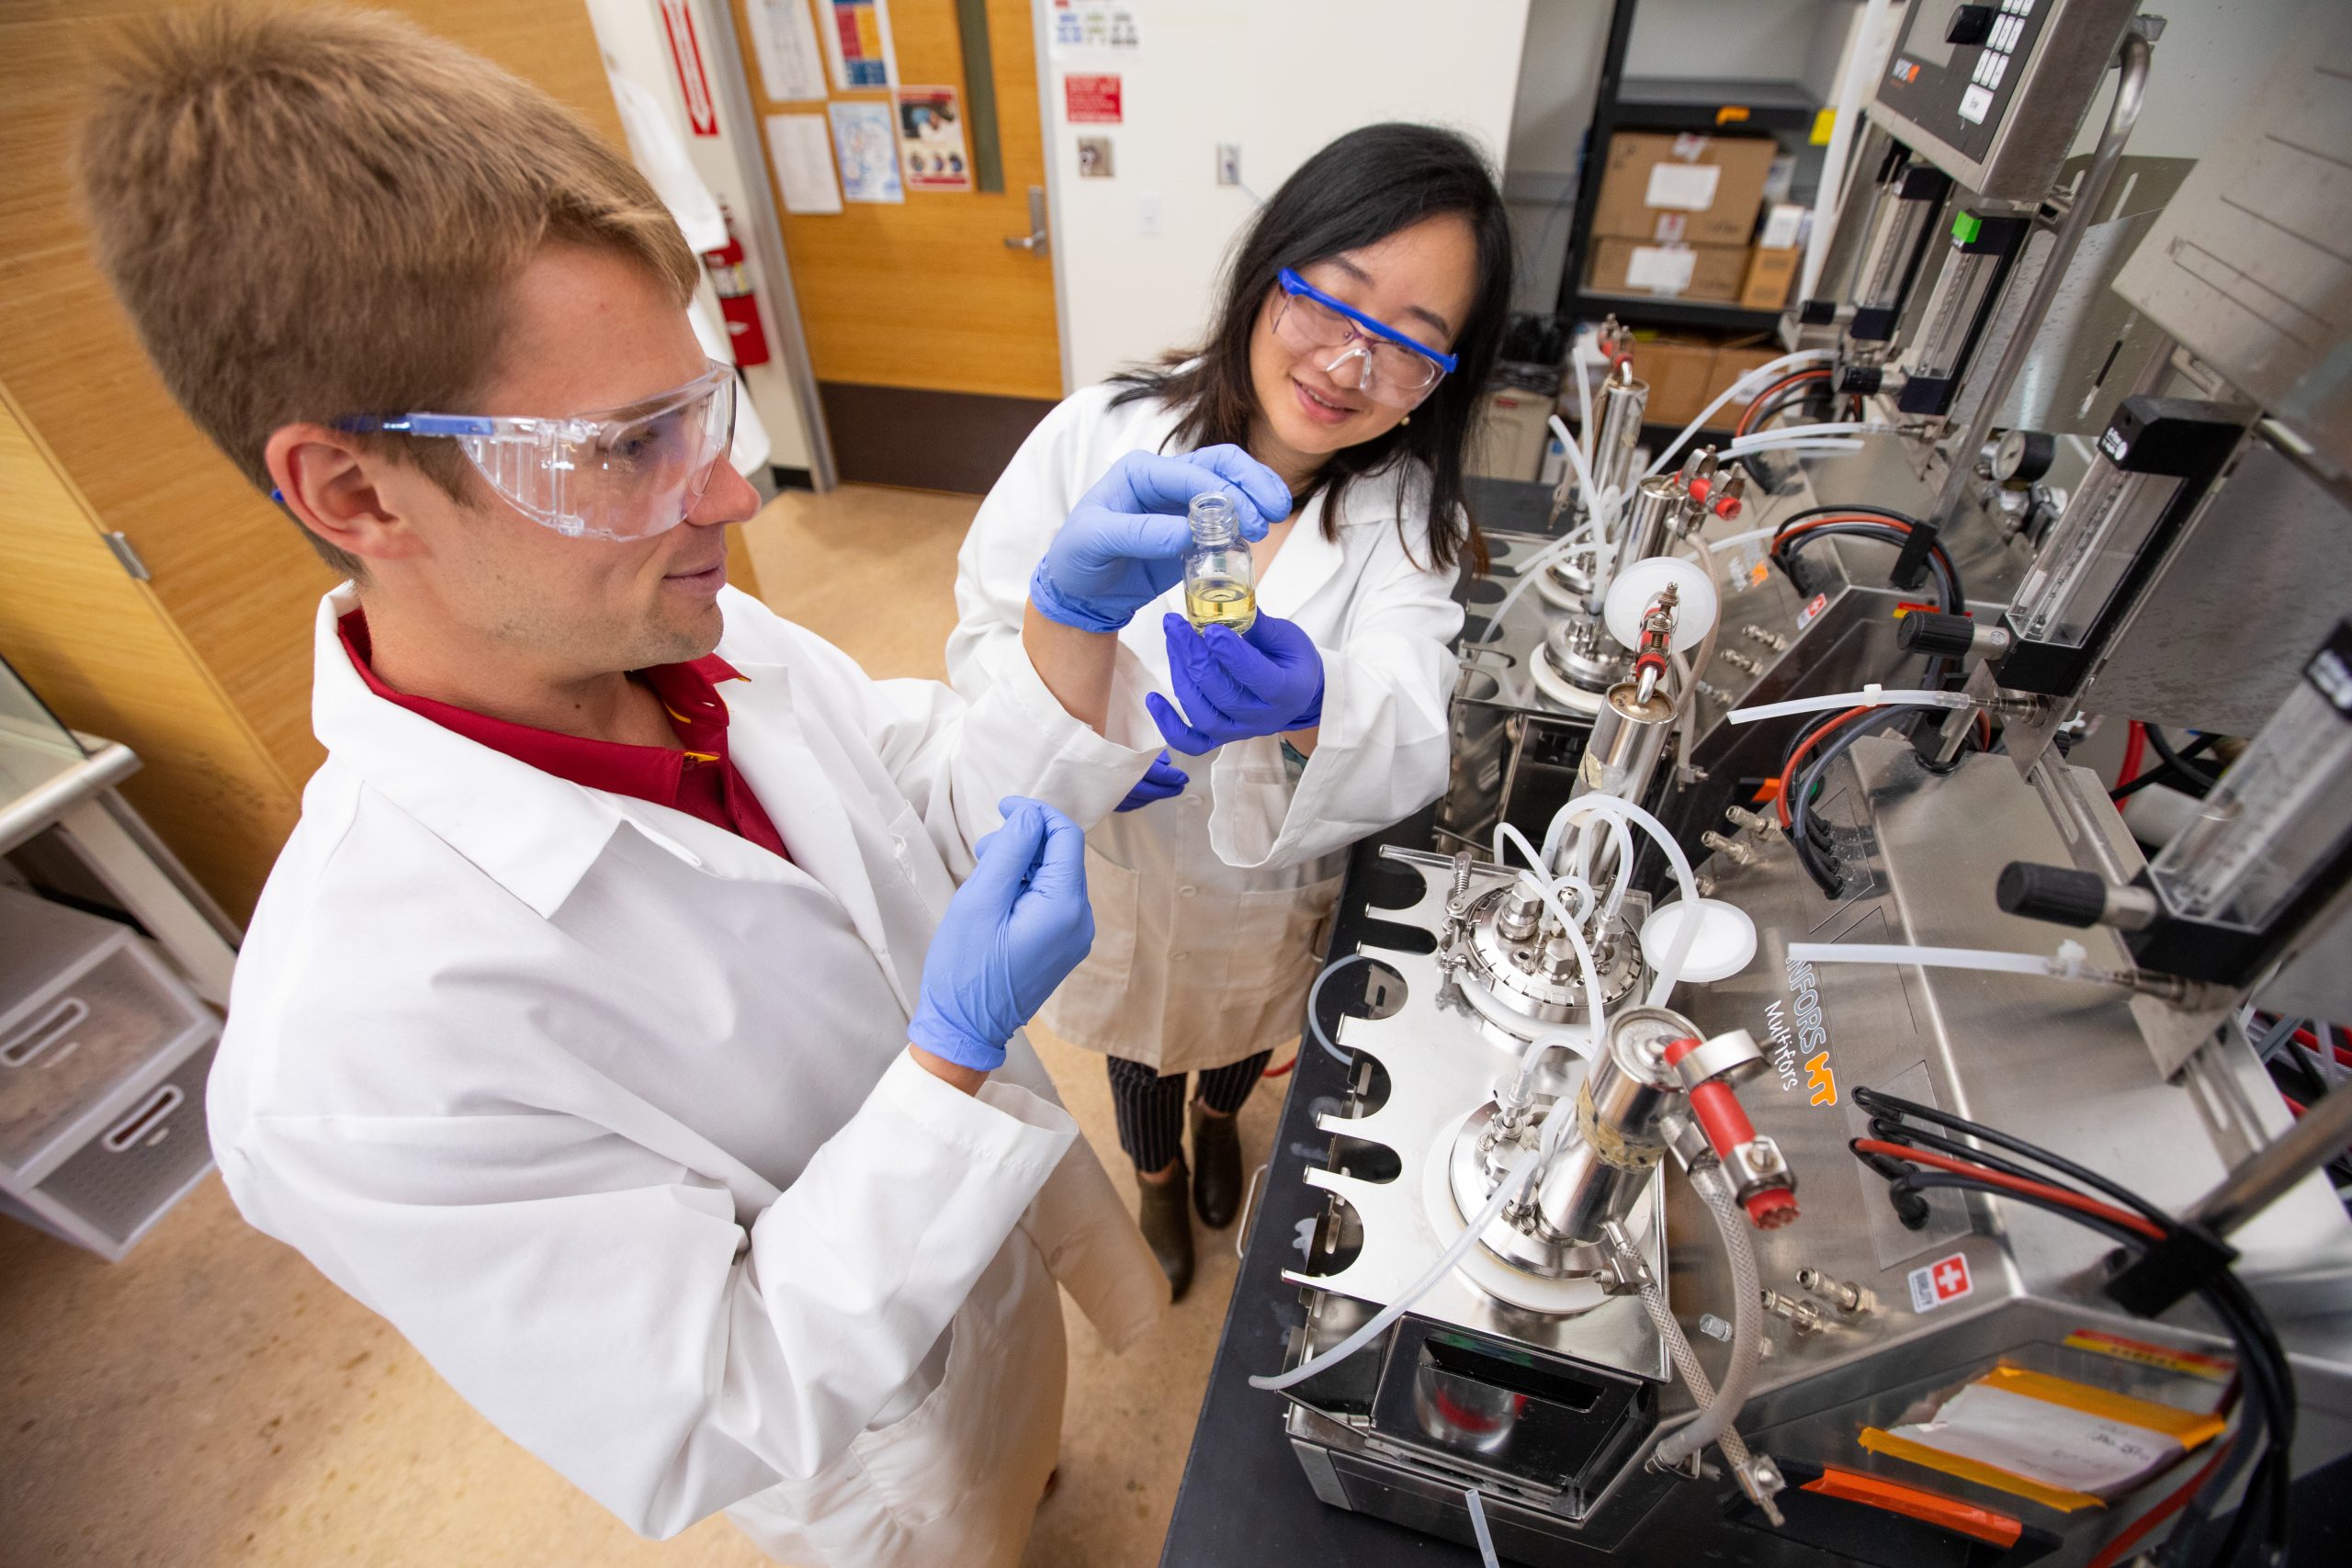 Two researchers work in the lab